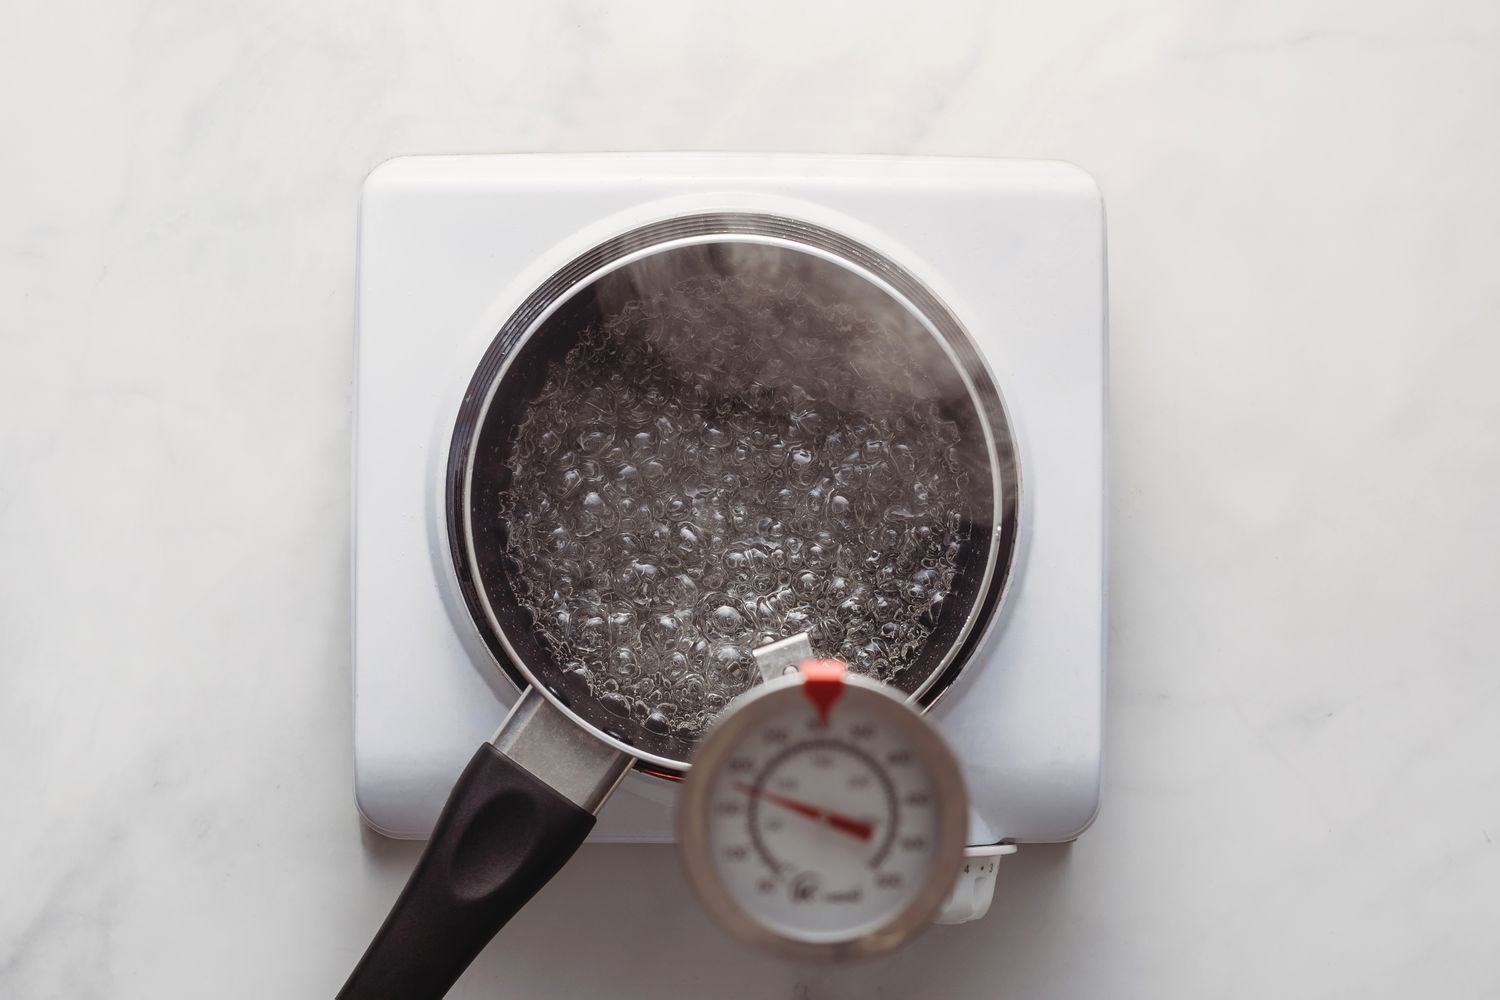 Candy thermometer inserted into boiling syrup in the saucepan